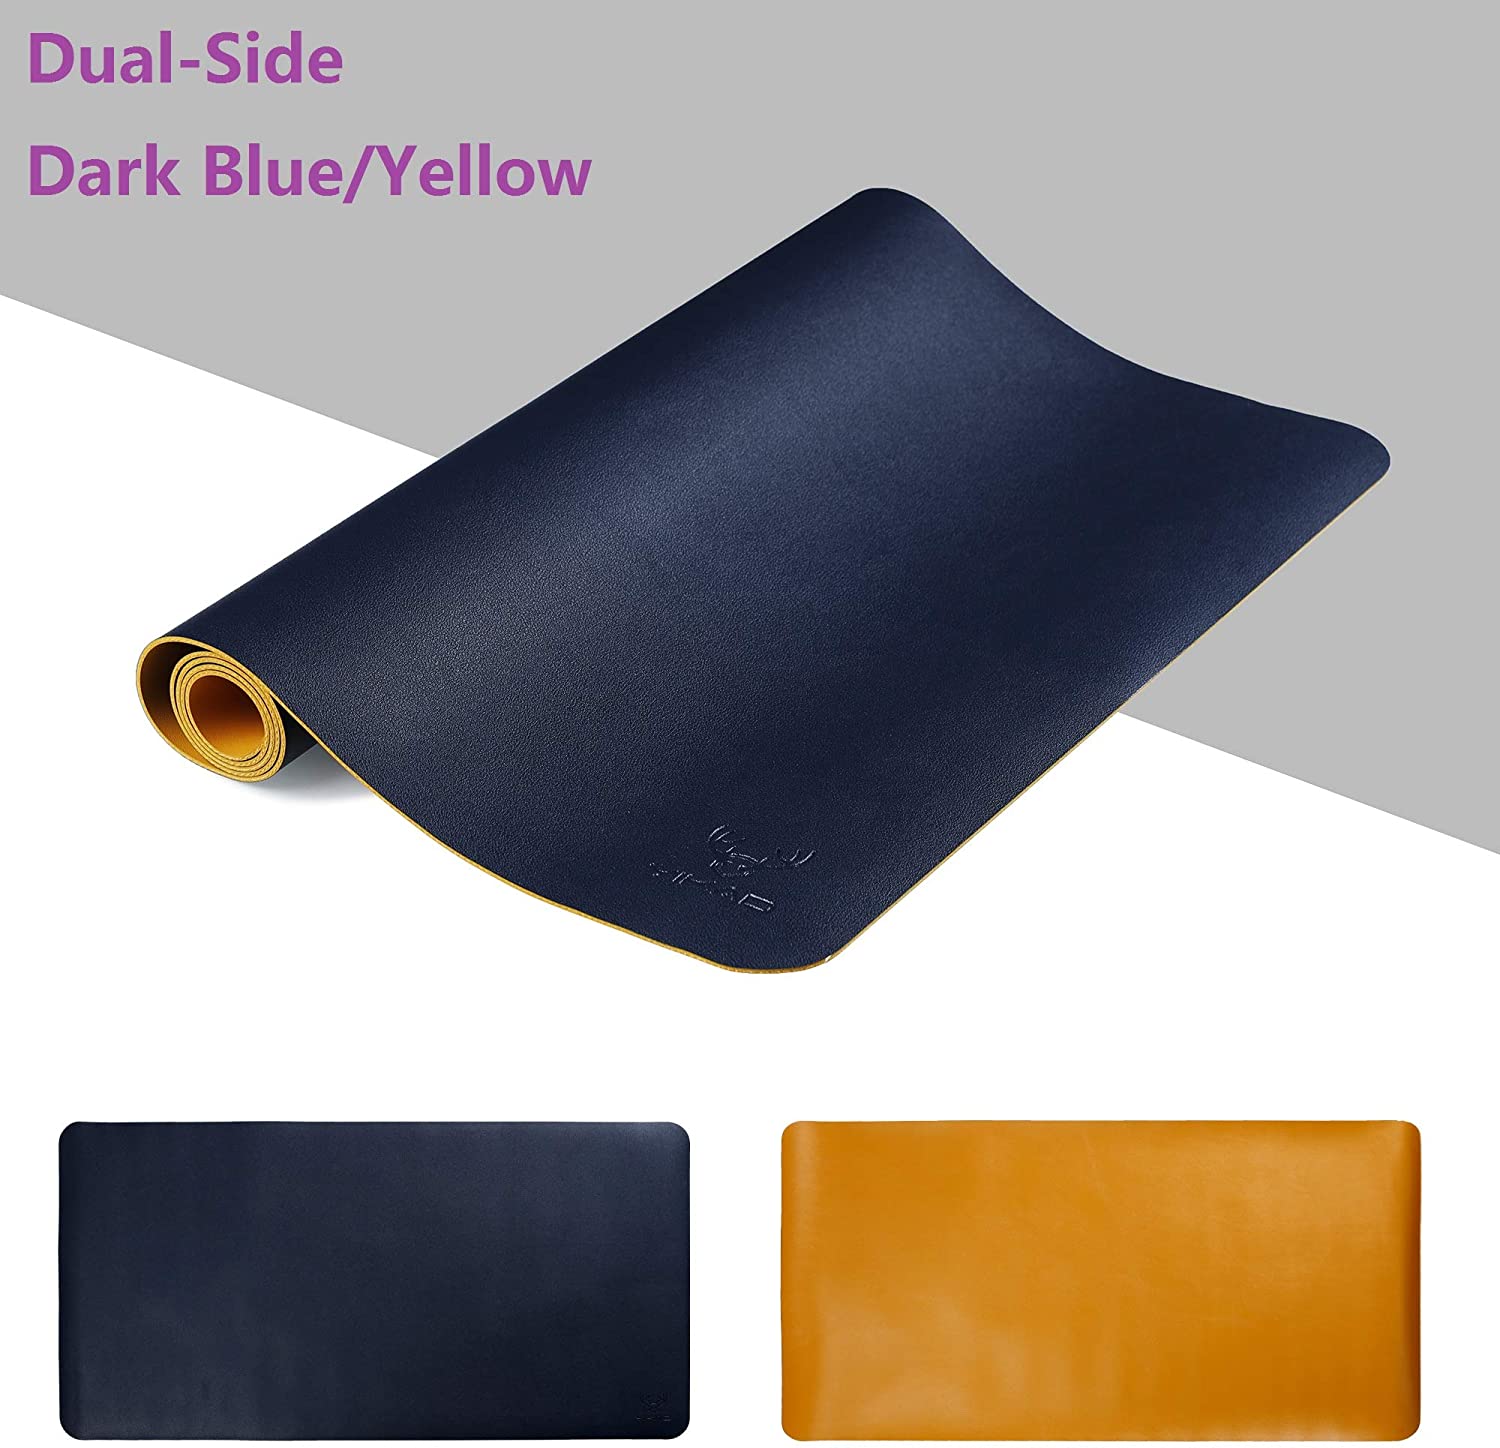 Yikda Extended Leather Gaming Mouse Pad / Mat. - e4cents